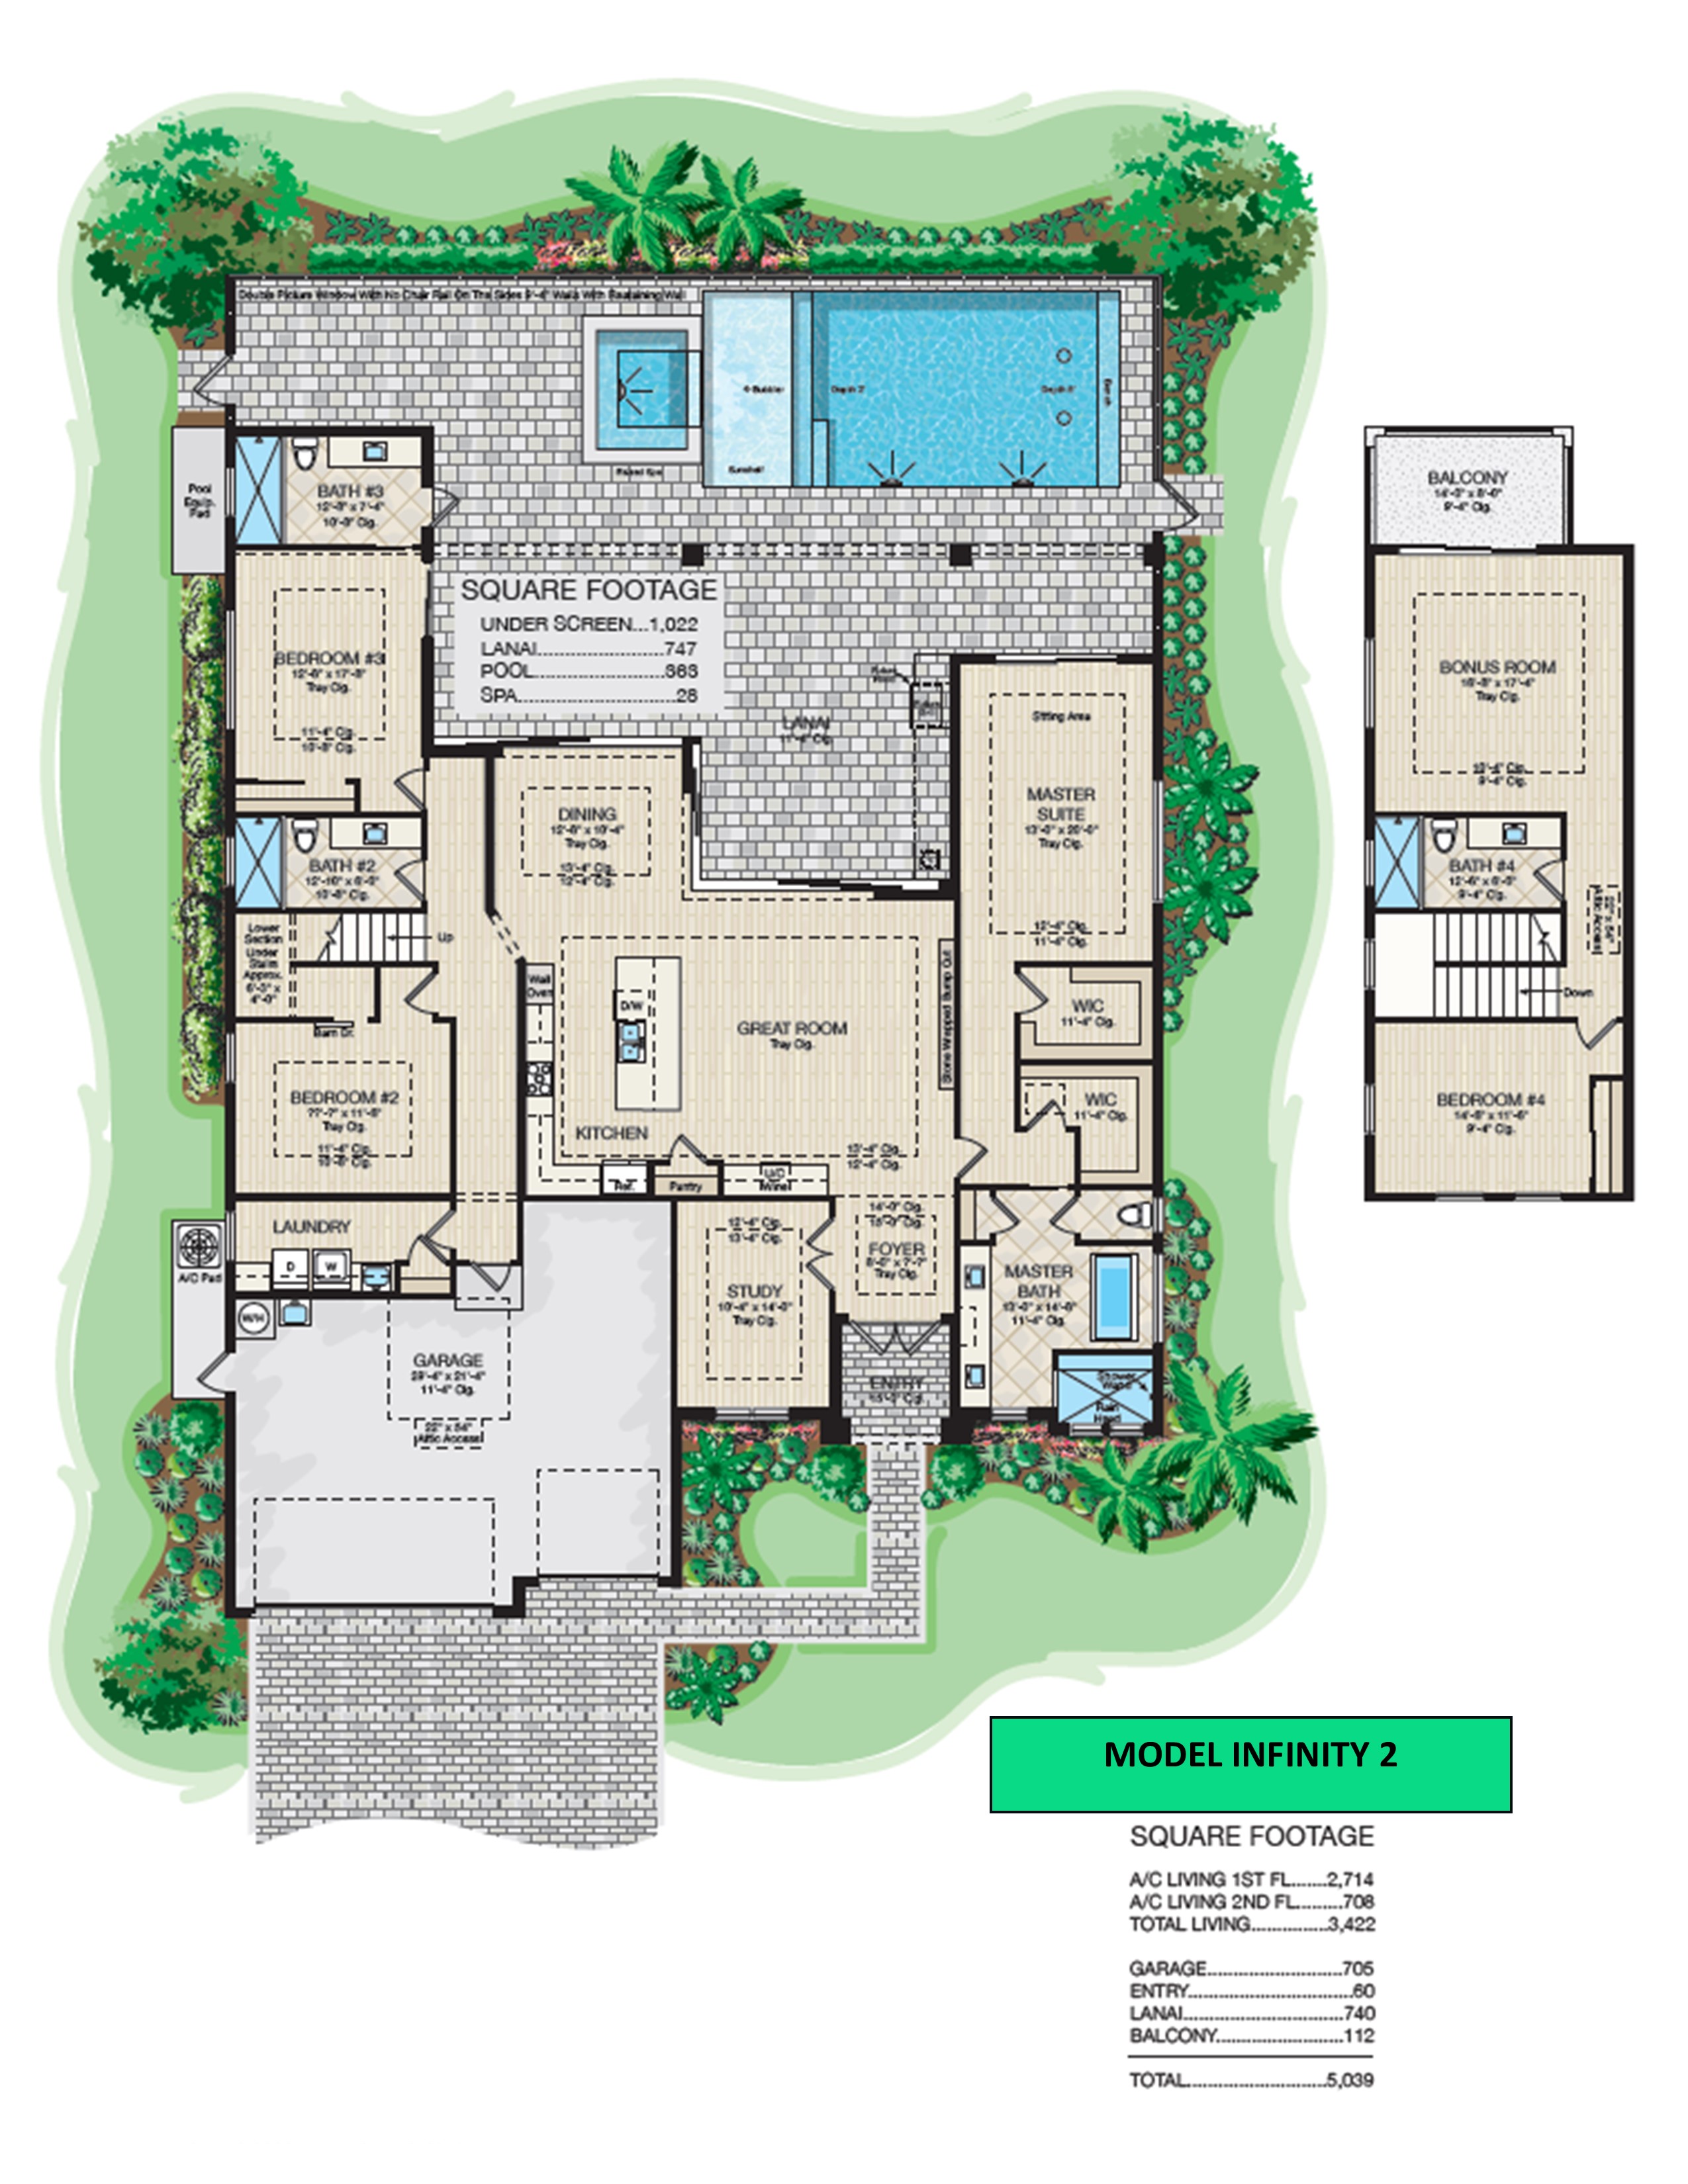 Architect Rendering of the model home Infinity 2